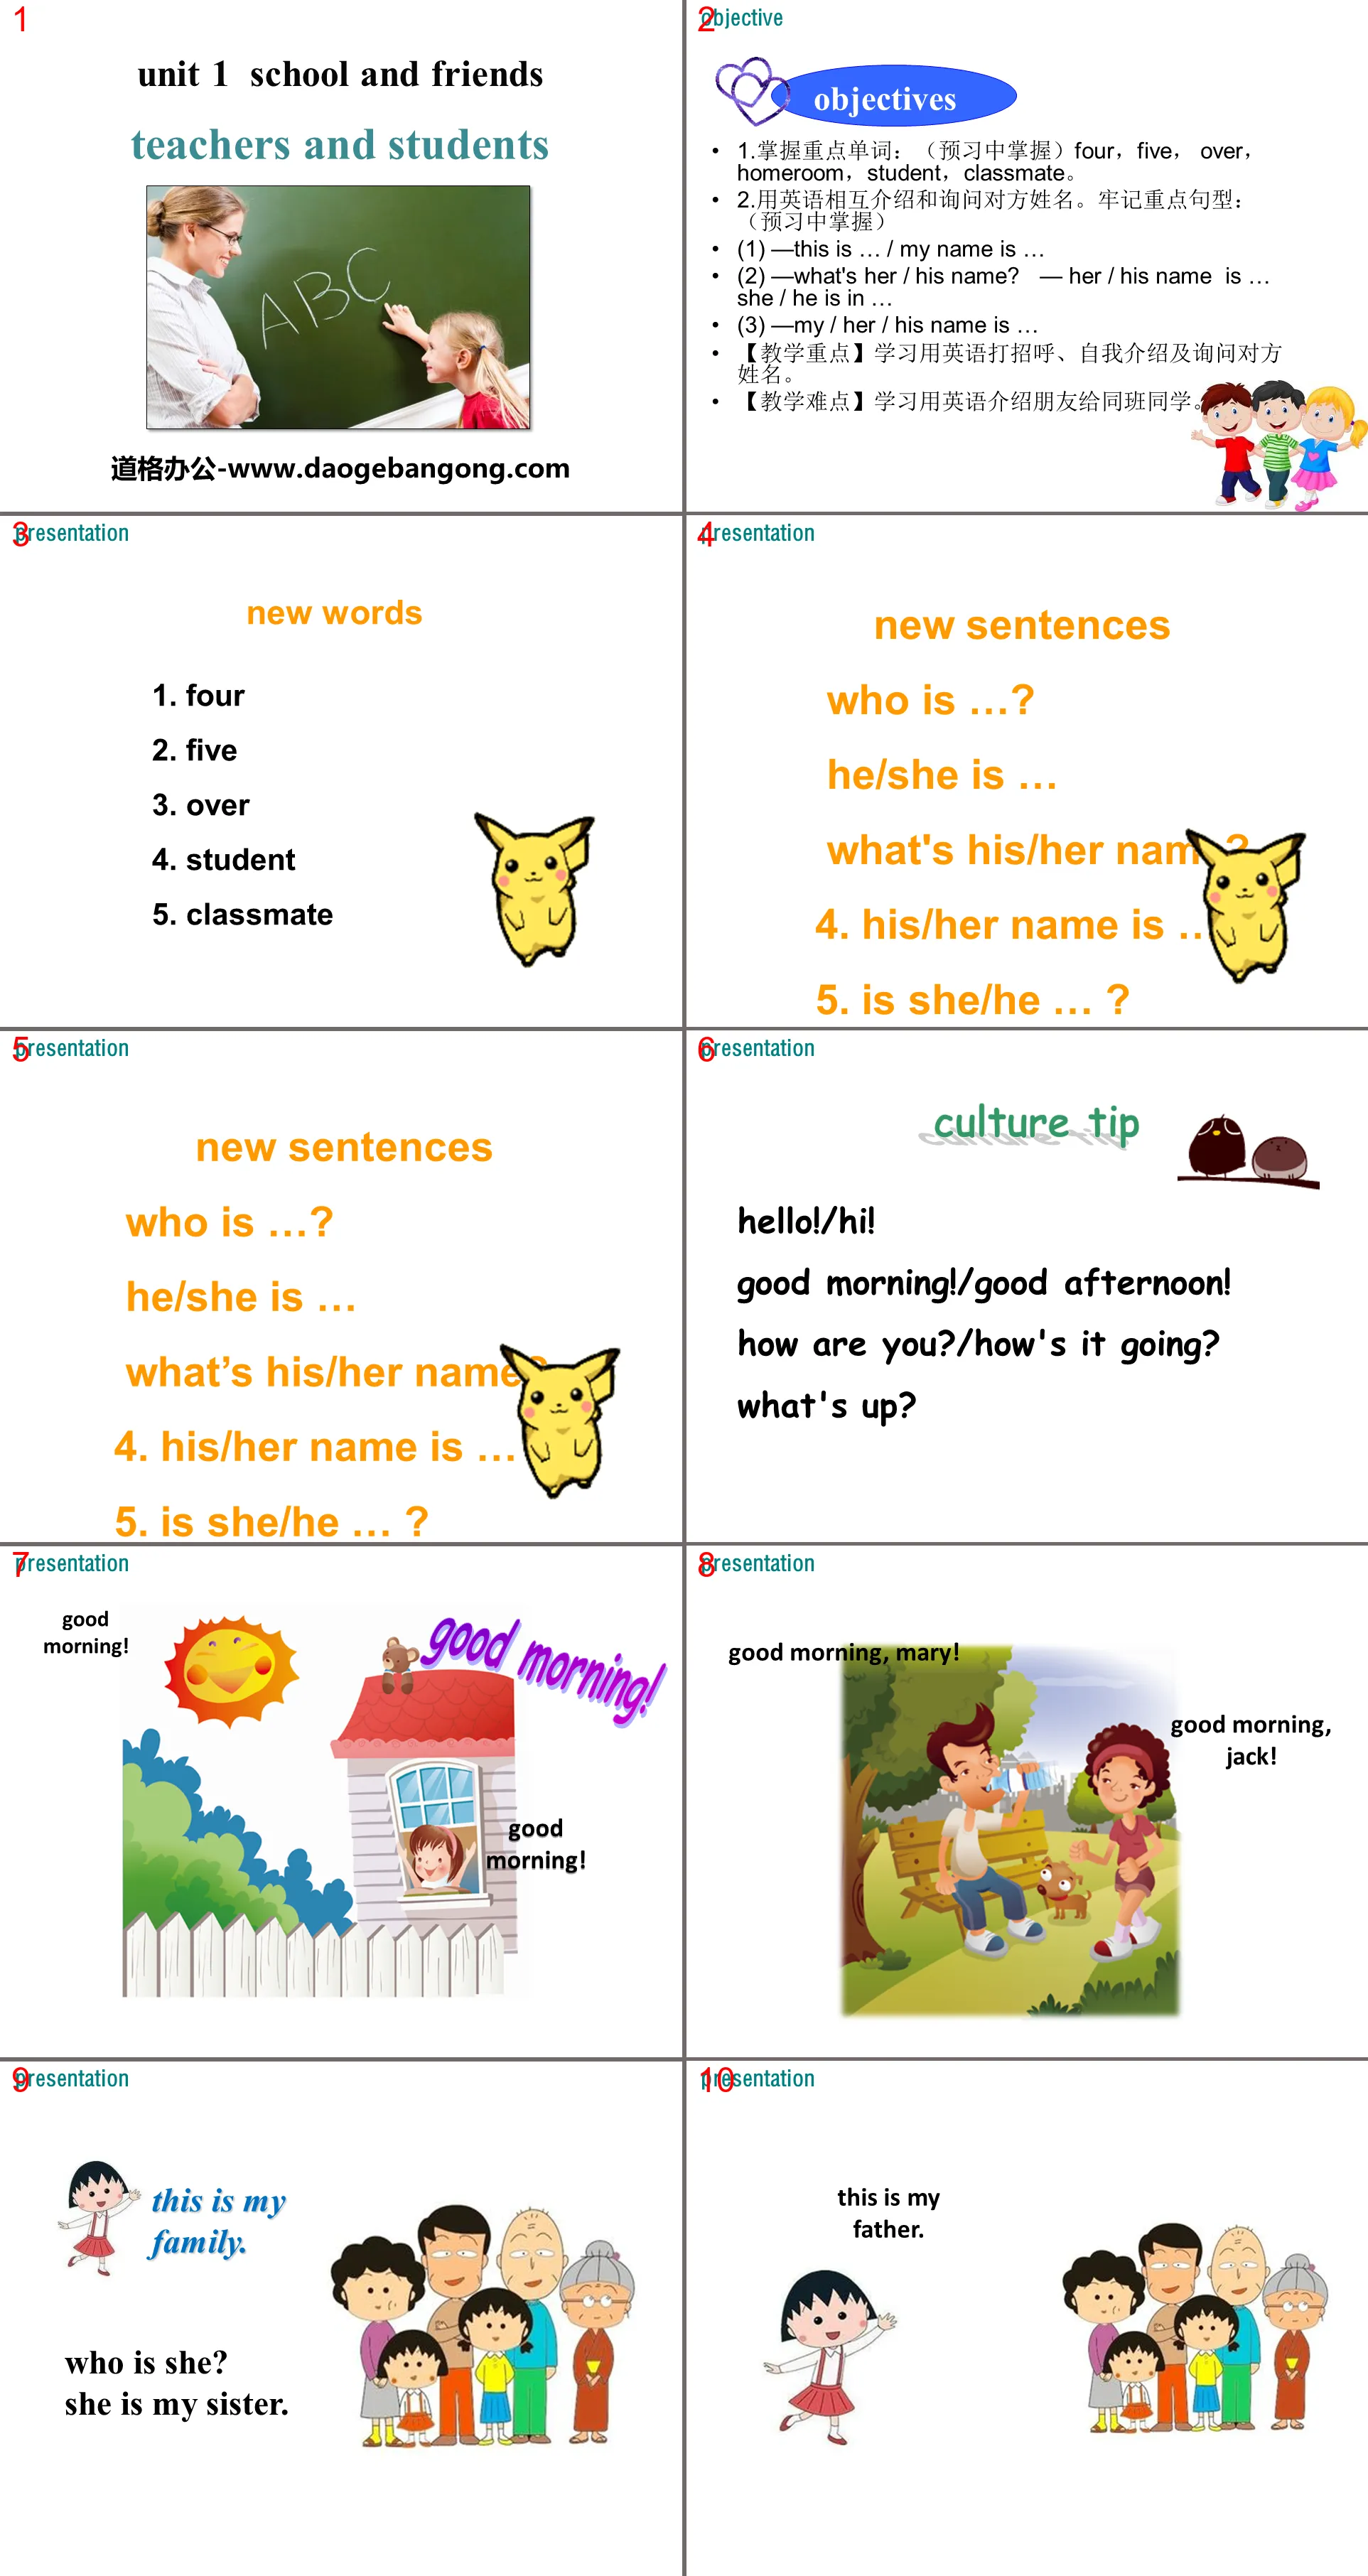 《Teachers and Students》School and Friends PPT
